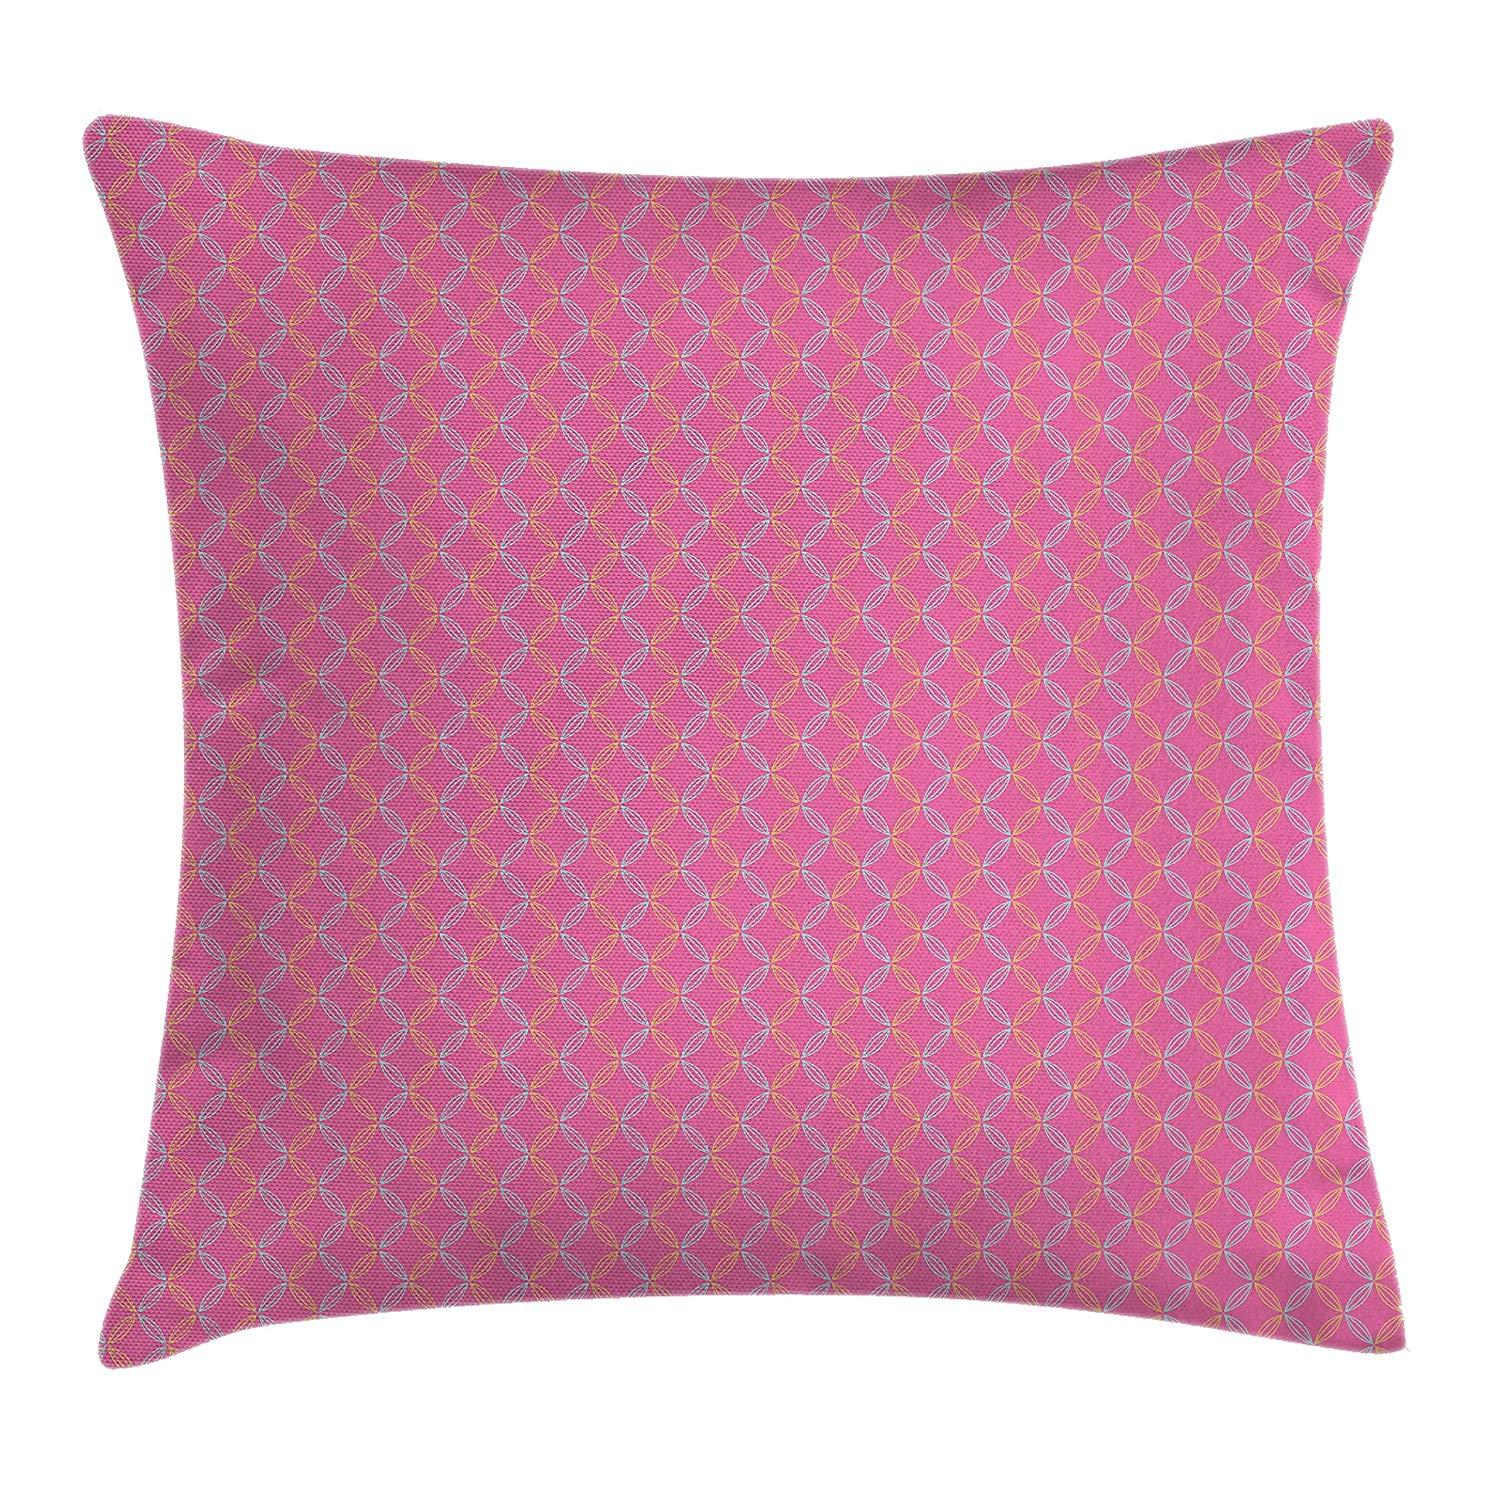 Red Square with White Plus Sign Logo - Amazon.com: Ambesonne Geometric Throw Pillow Cushion Cover, Circular ...